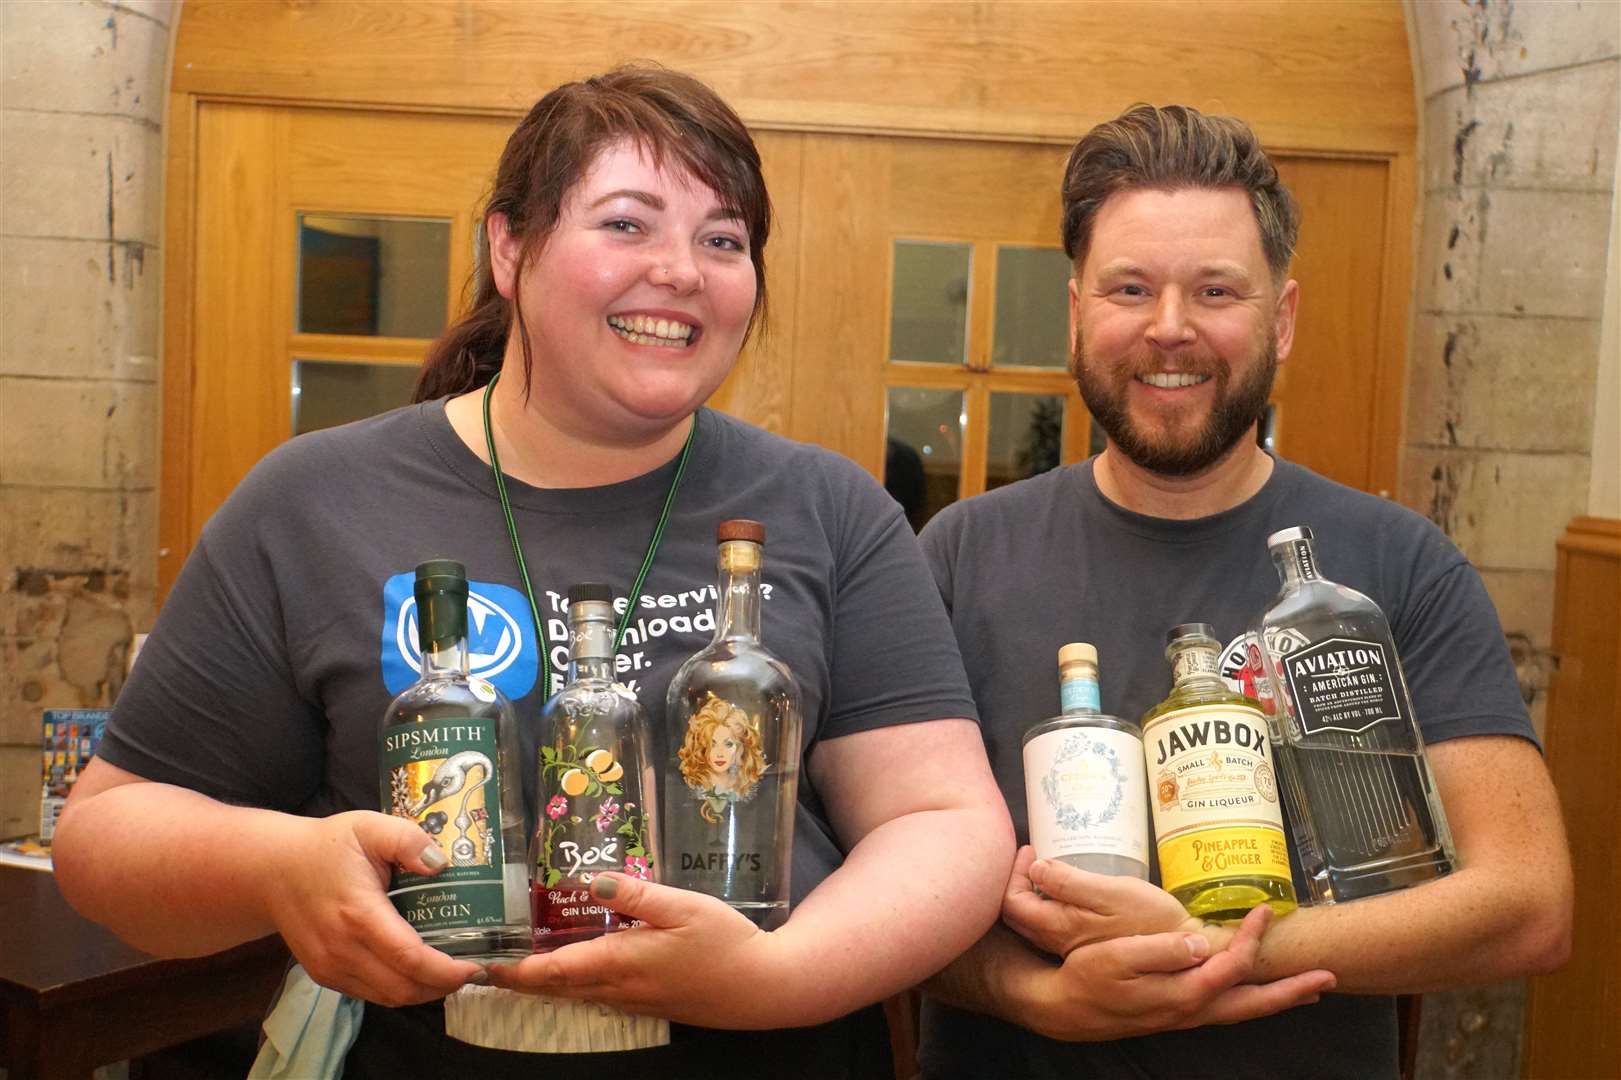 Anne Flynn was the hostess for the Wetherspoon gin tasting event and was ably supported by manager Jamie Gunn.